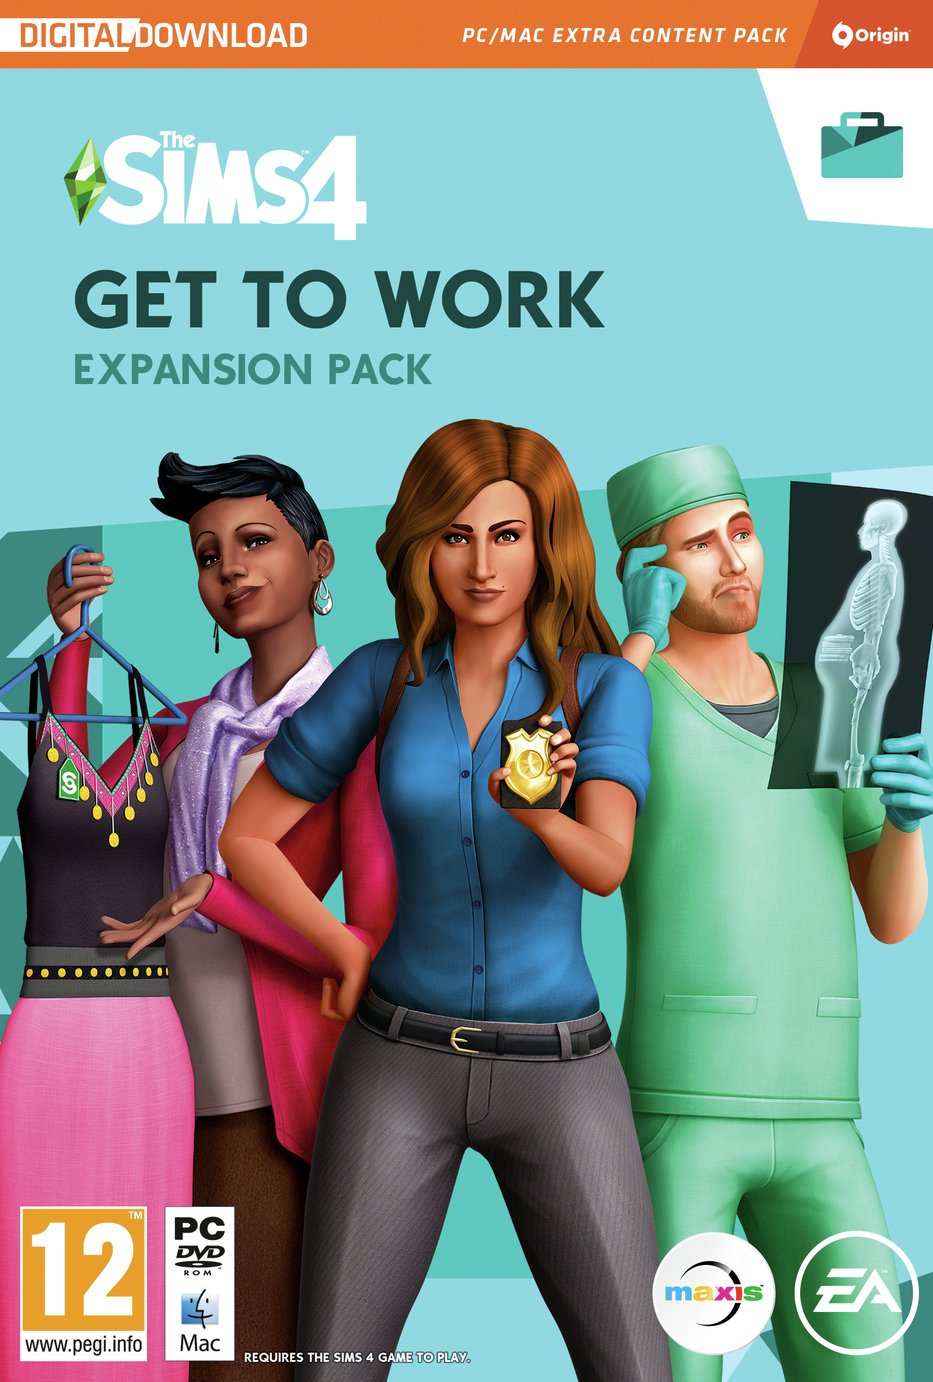 The Sims 4 Get To Work PC Game